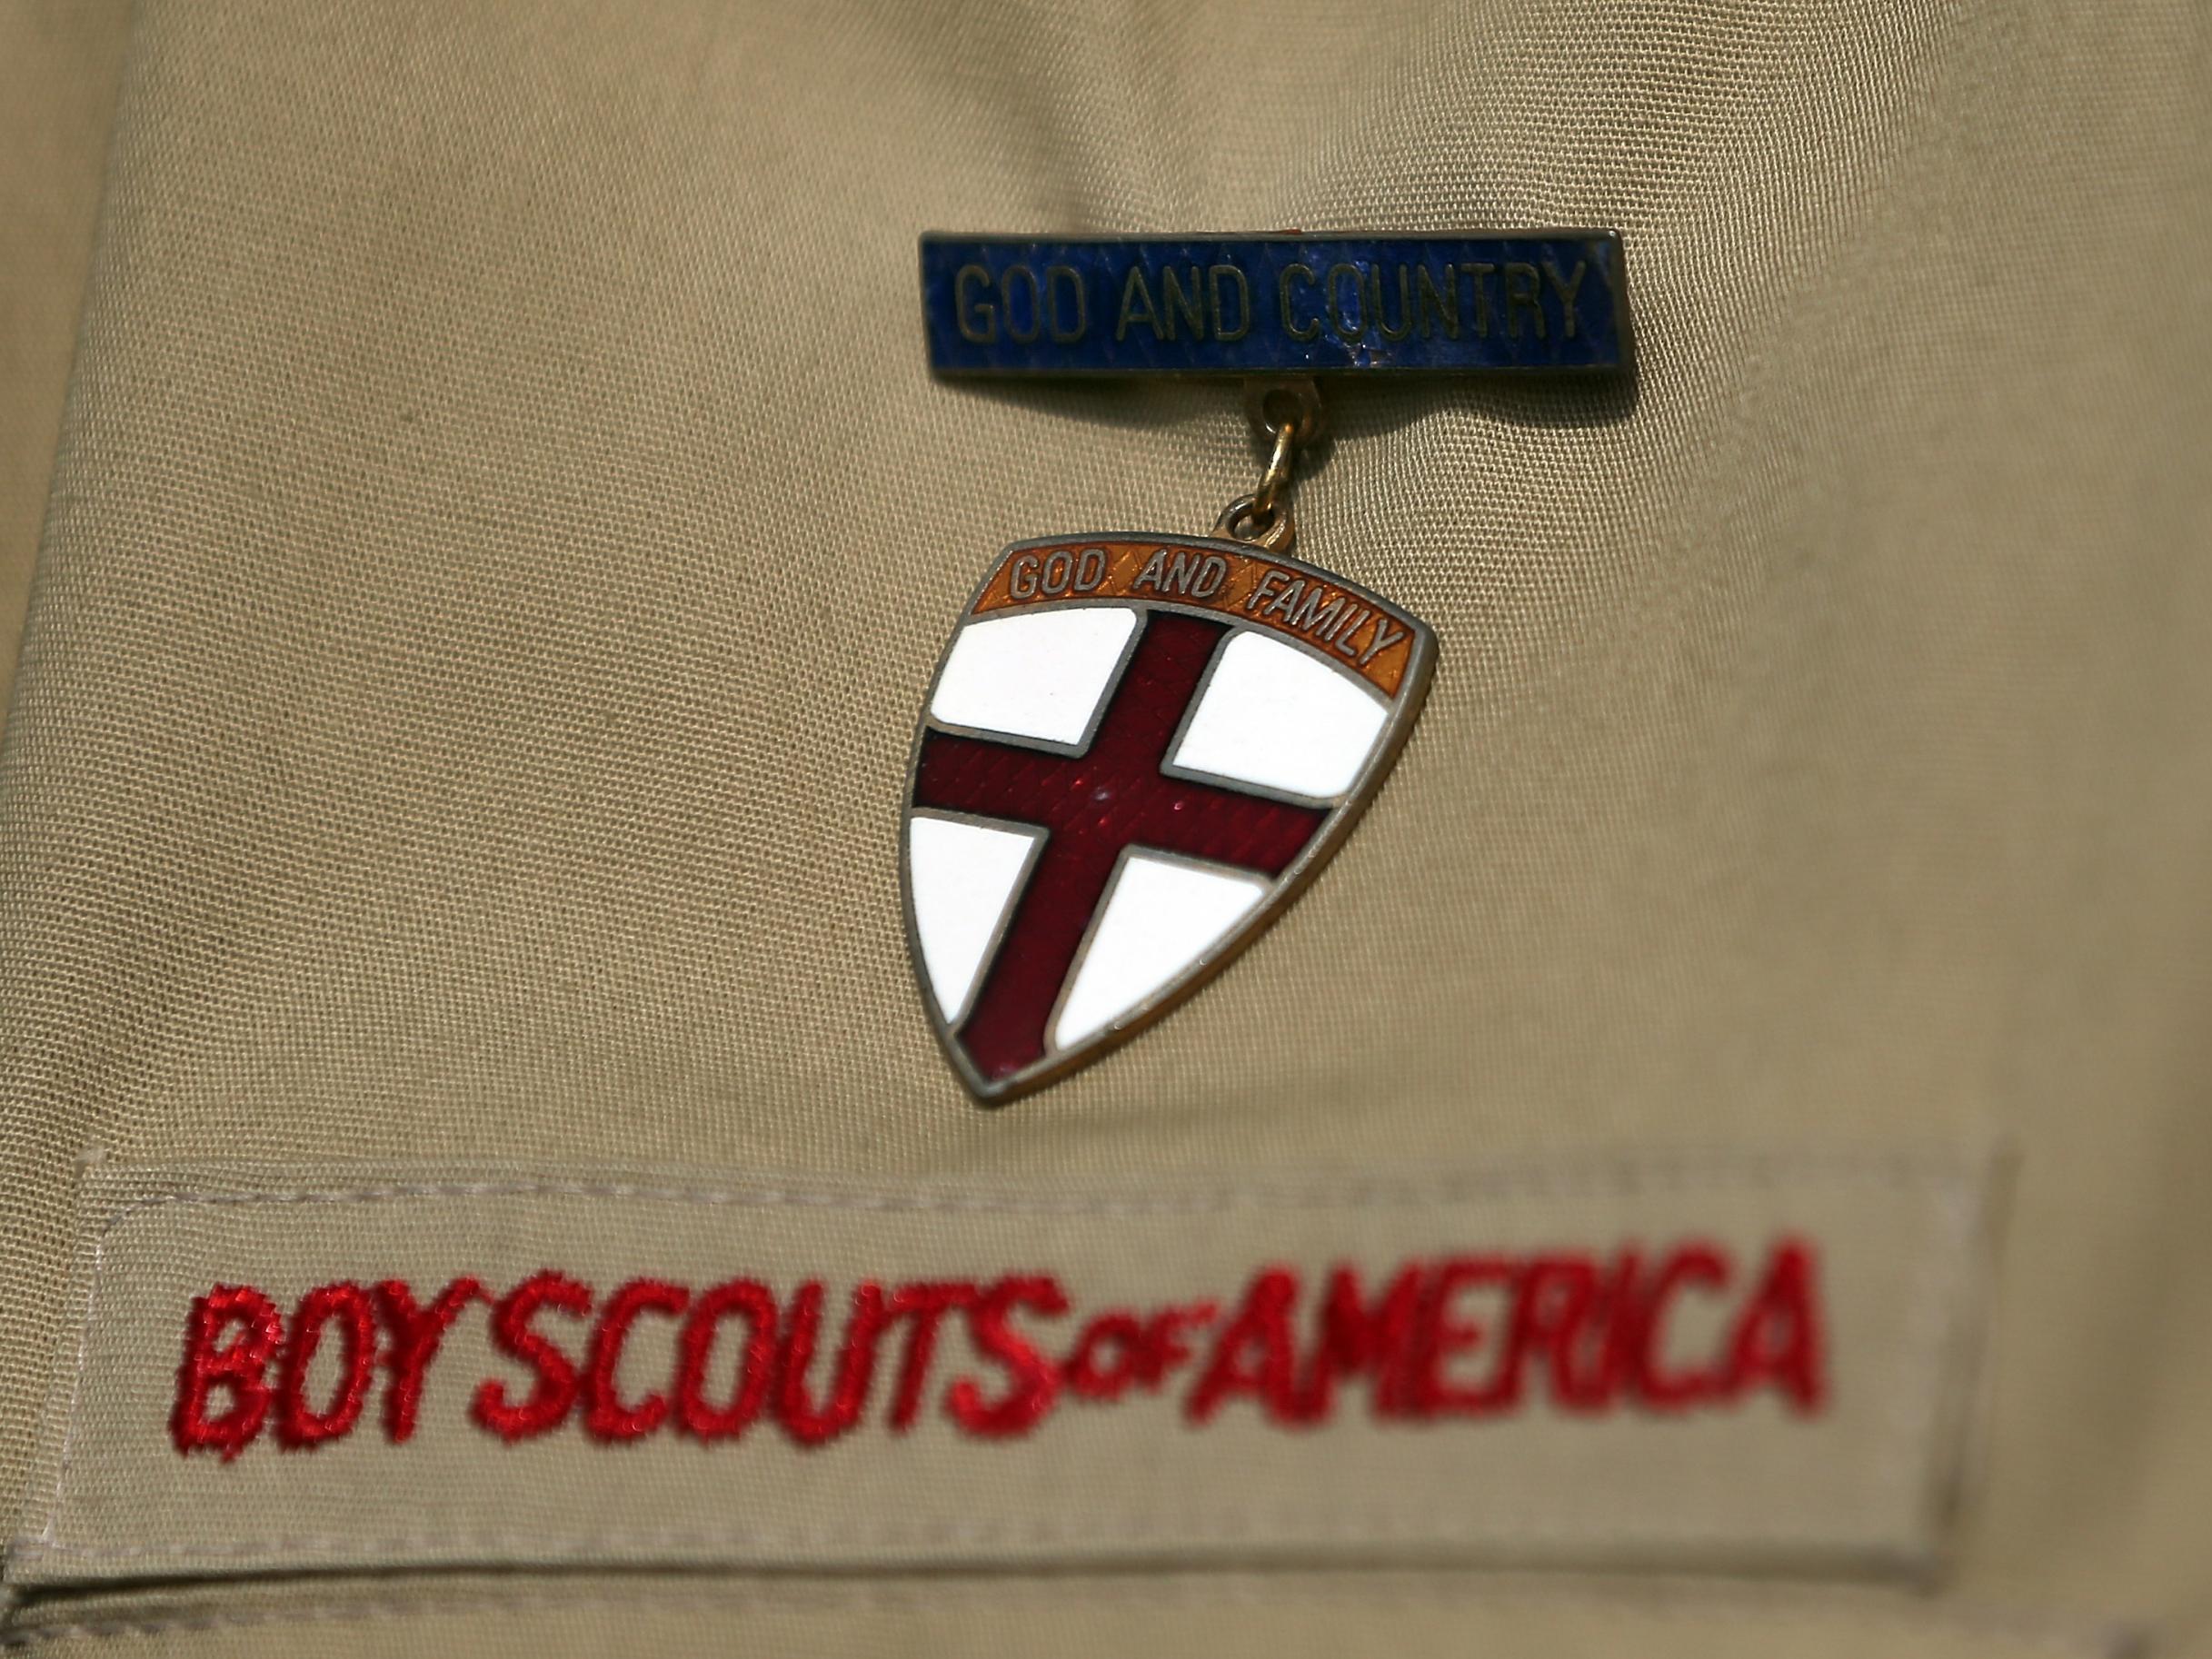 In filing for bankruptcy, the Scouts can now place all lawsuits on hold